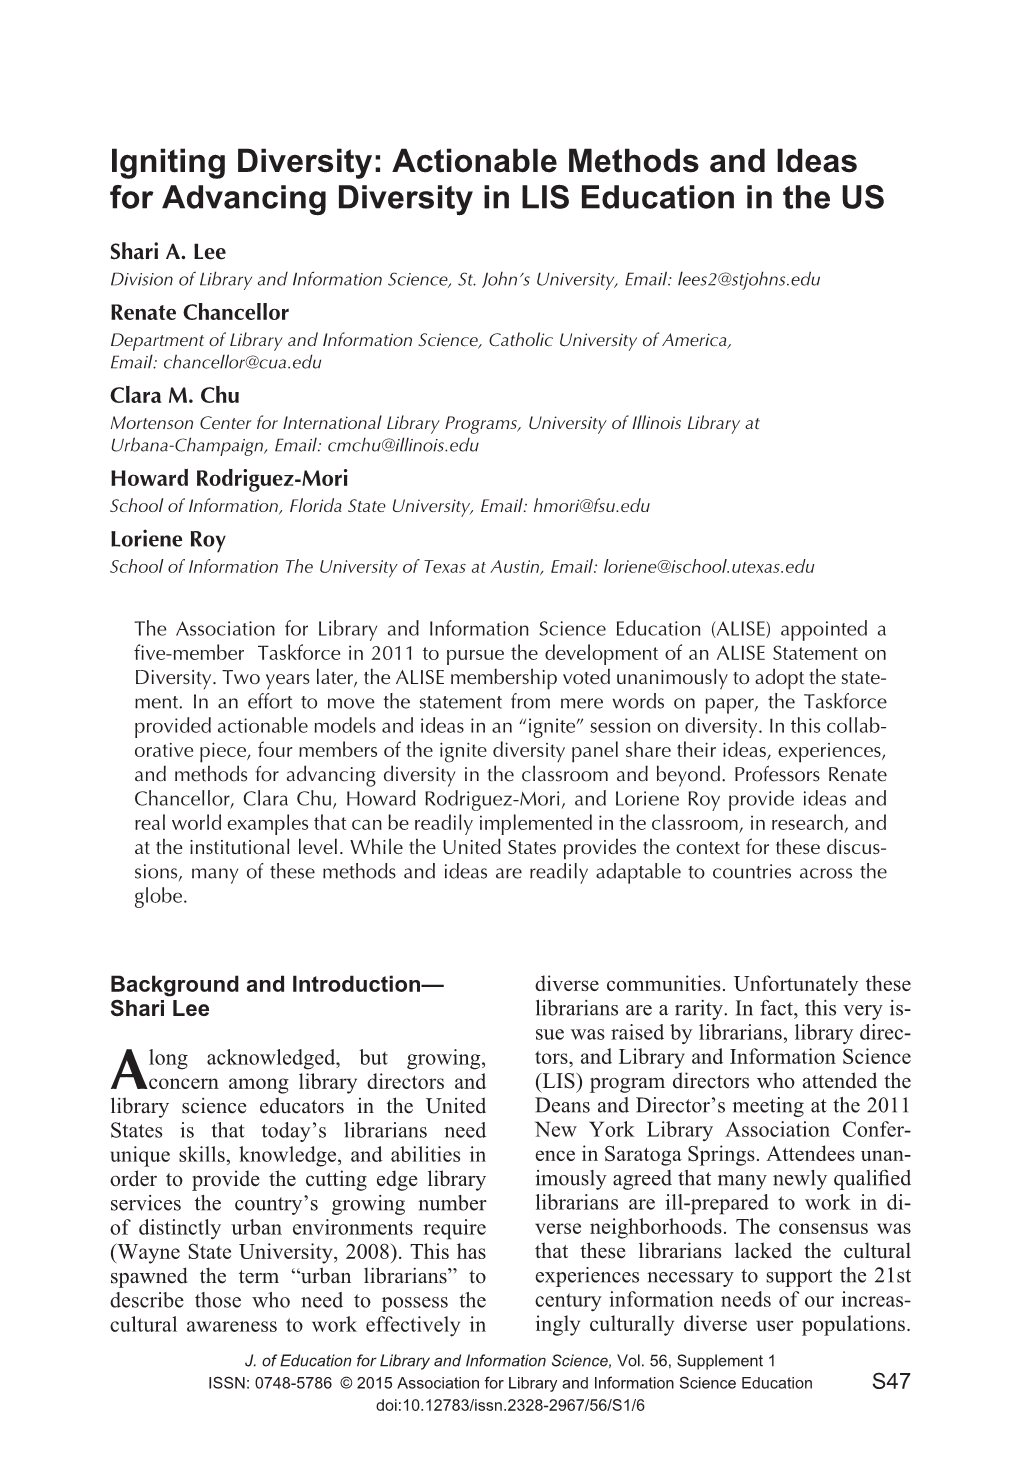 Actionable Methods and Ideas for Advancing Diversity in LIS Education in the US Shari A